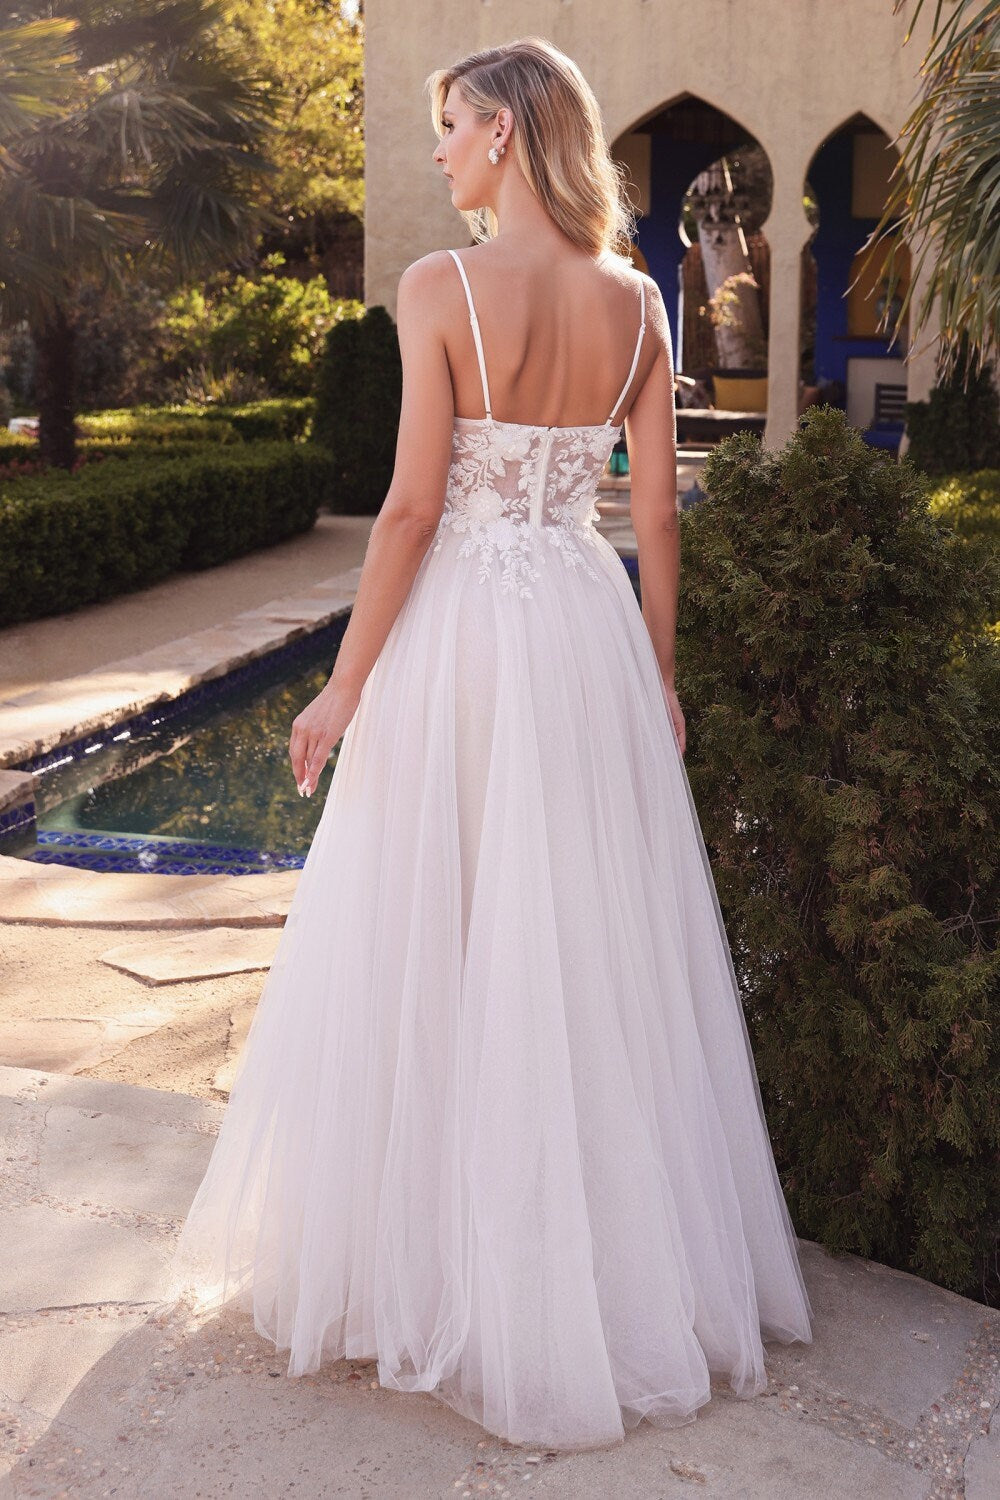 Classic Simple A-Line Sleeveless with Straps Layered Tulle Wedding Dress Bridal Gown Sexy Plunge Split Neckline Open Back Beach Style Design